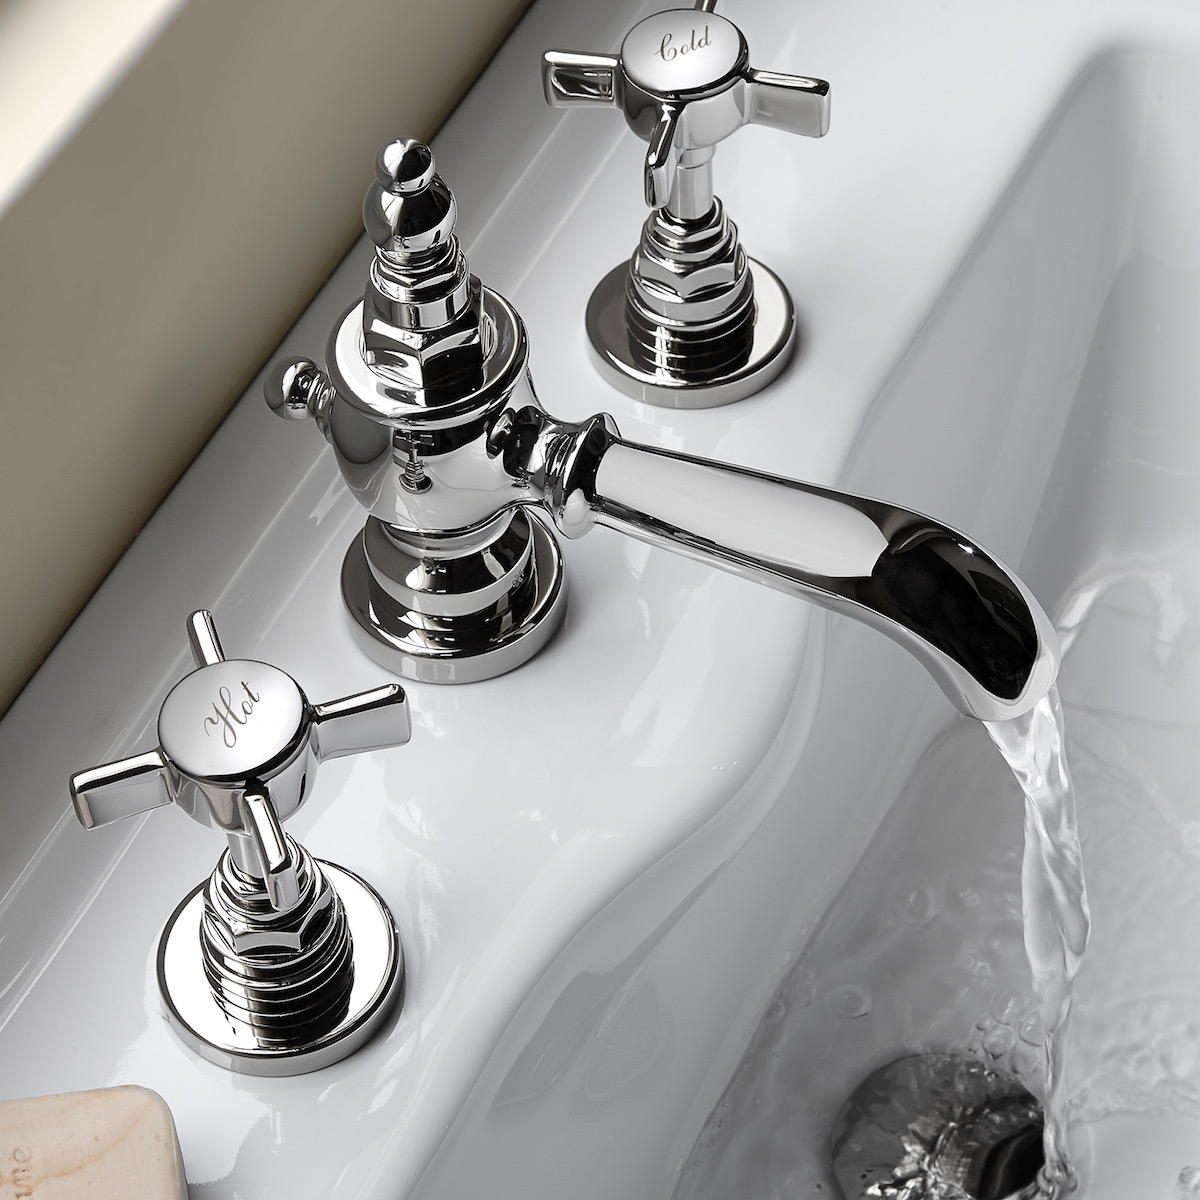 luxury kohler faucets and fixtures at the immerse plumbing showroom in st. louis